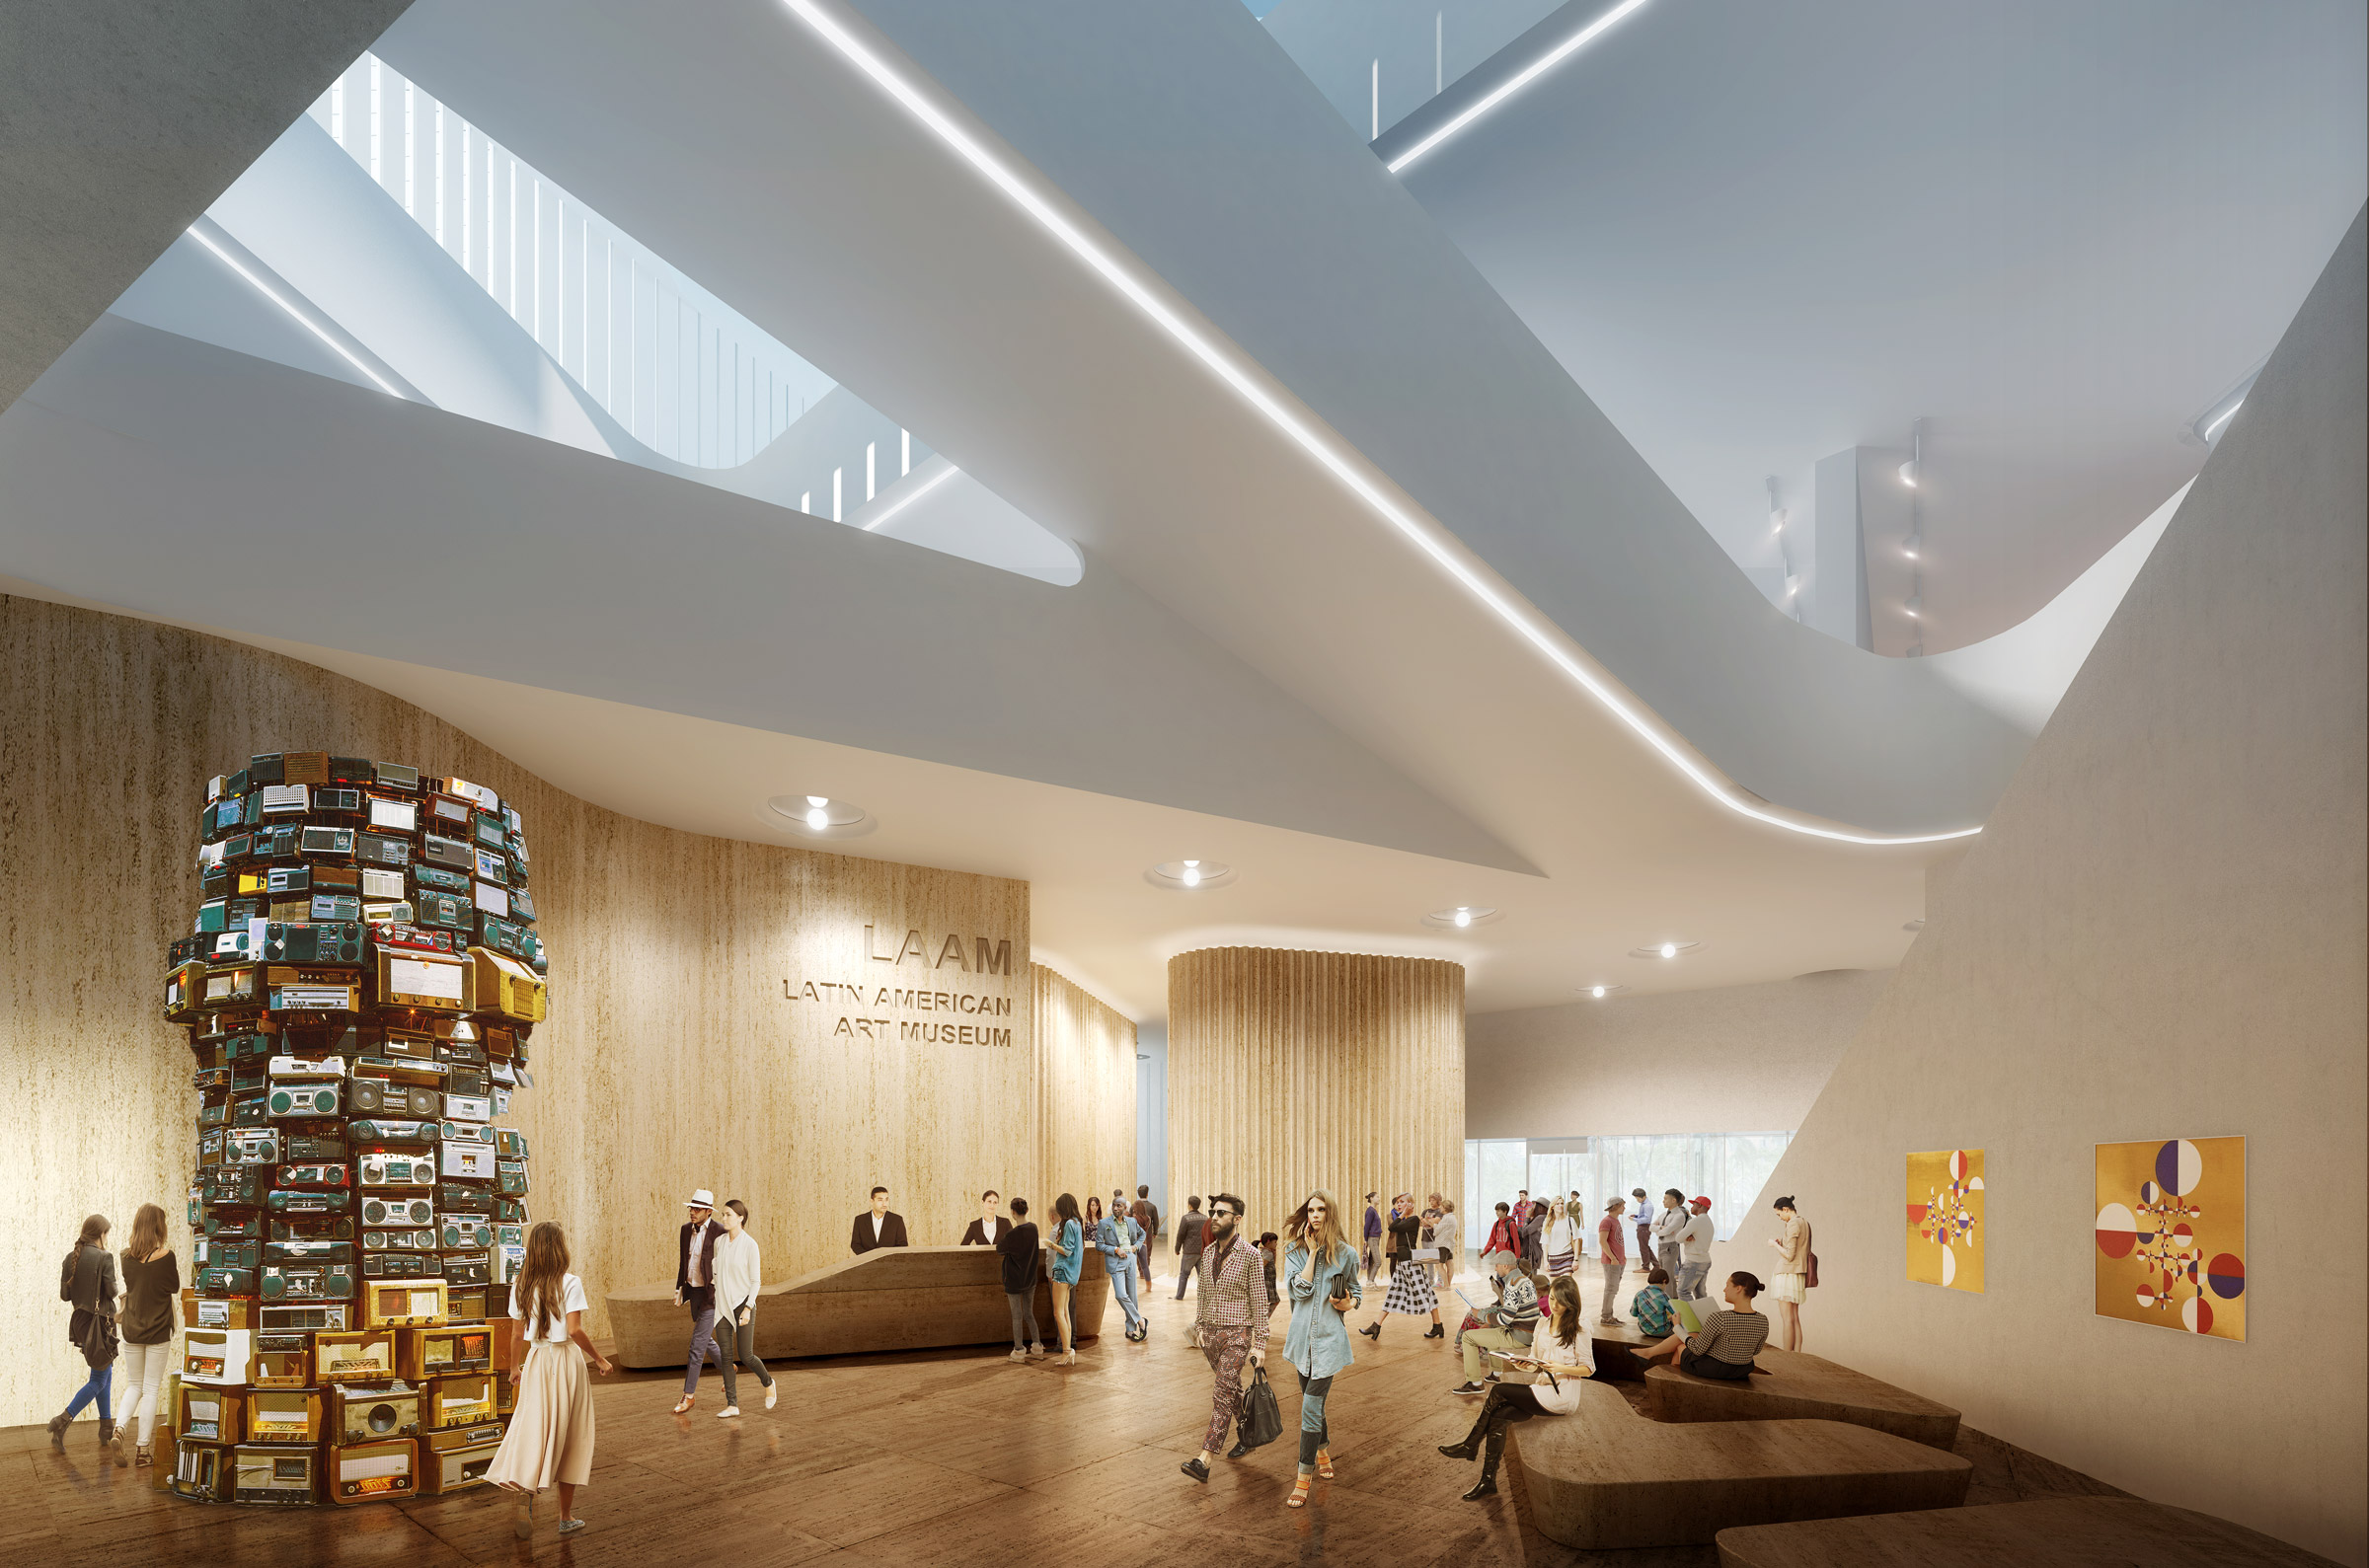 Gary Nader’s Art Museum & Towers Will Include a Theater Designed by Emilio Estefan